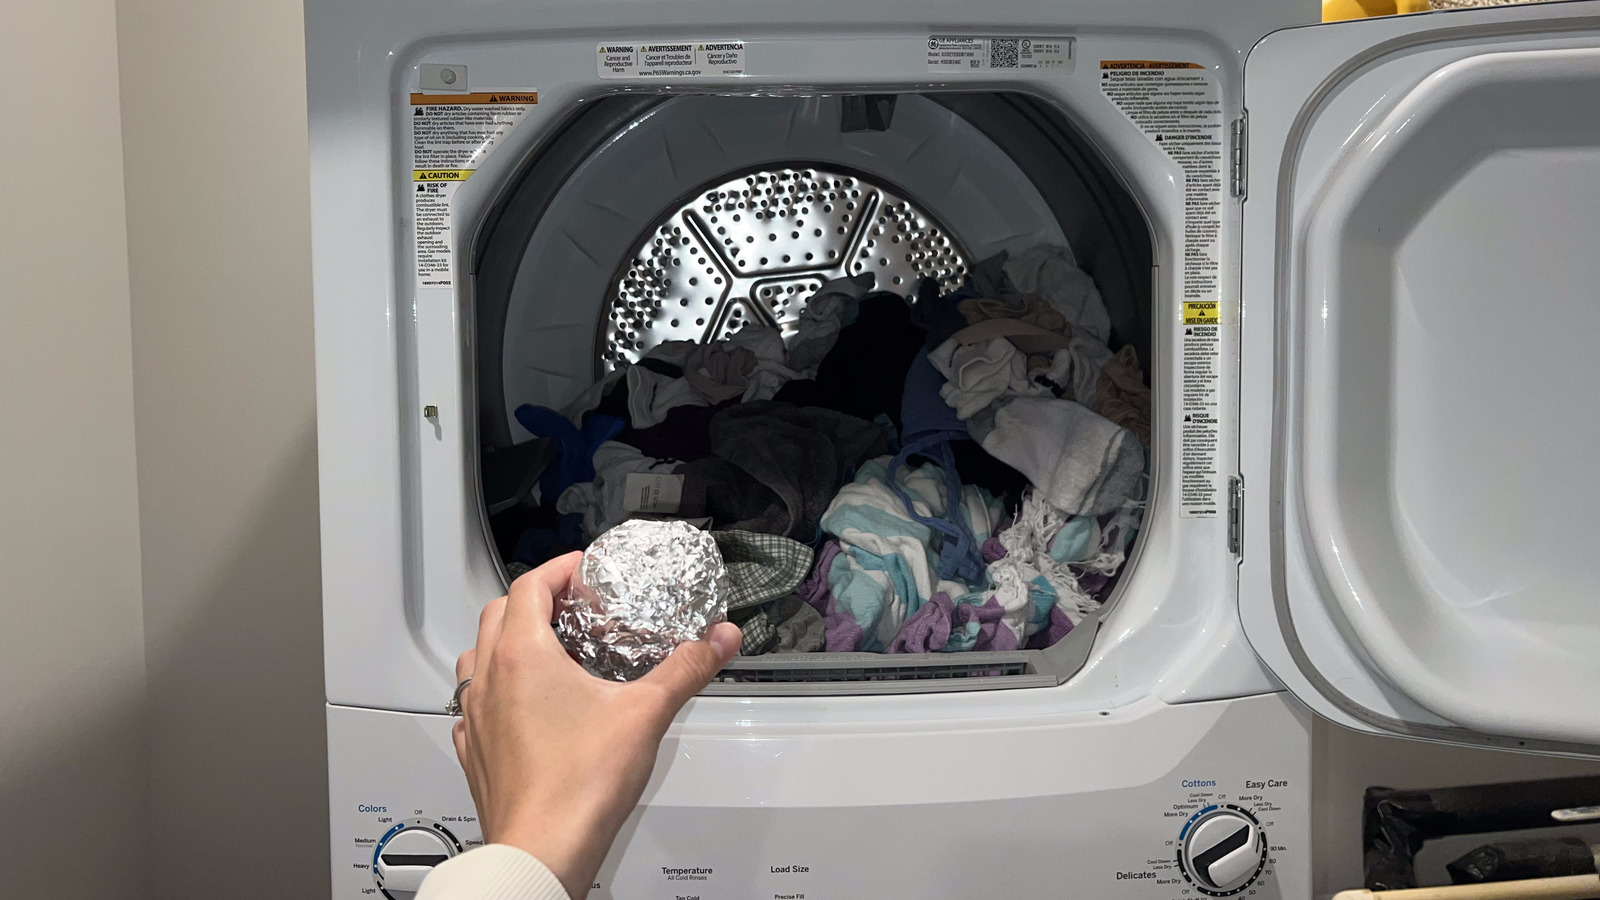 https://www.housedigest.com/img/gallery/we-tried-wrapping-a-tennis-ball-with-foil-to-reduce-laundry-static-with-tk-results/l-intro-1686242748.jpg